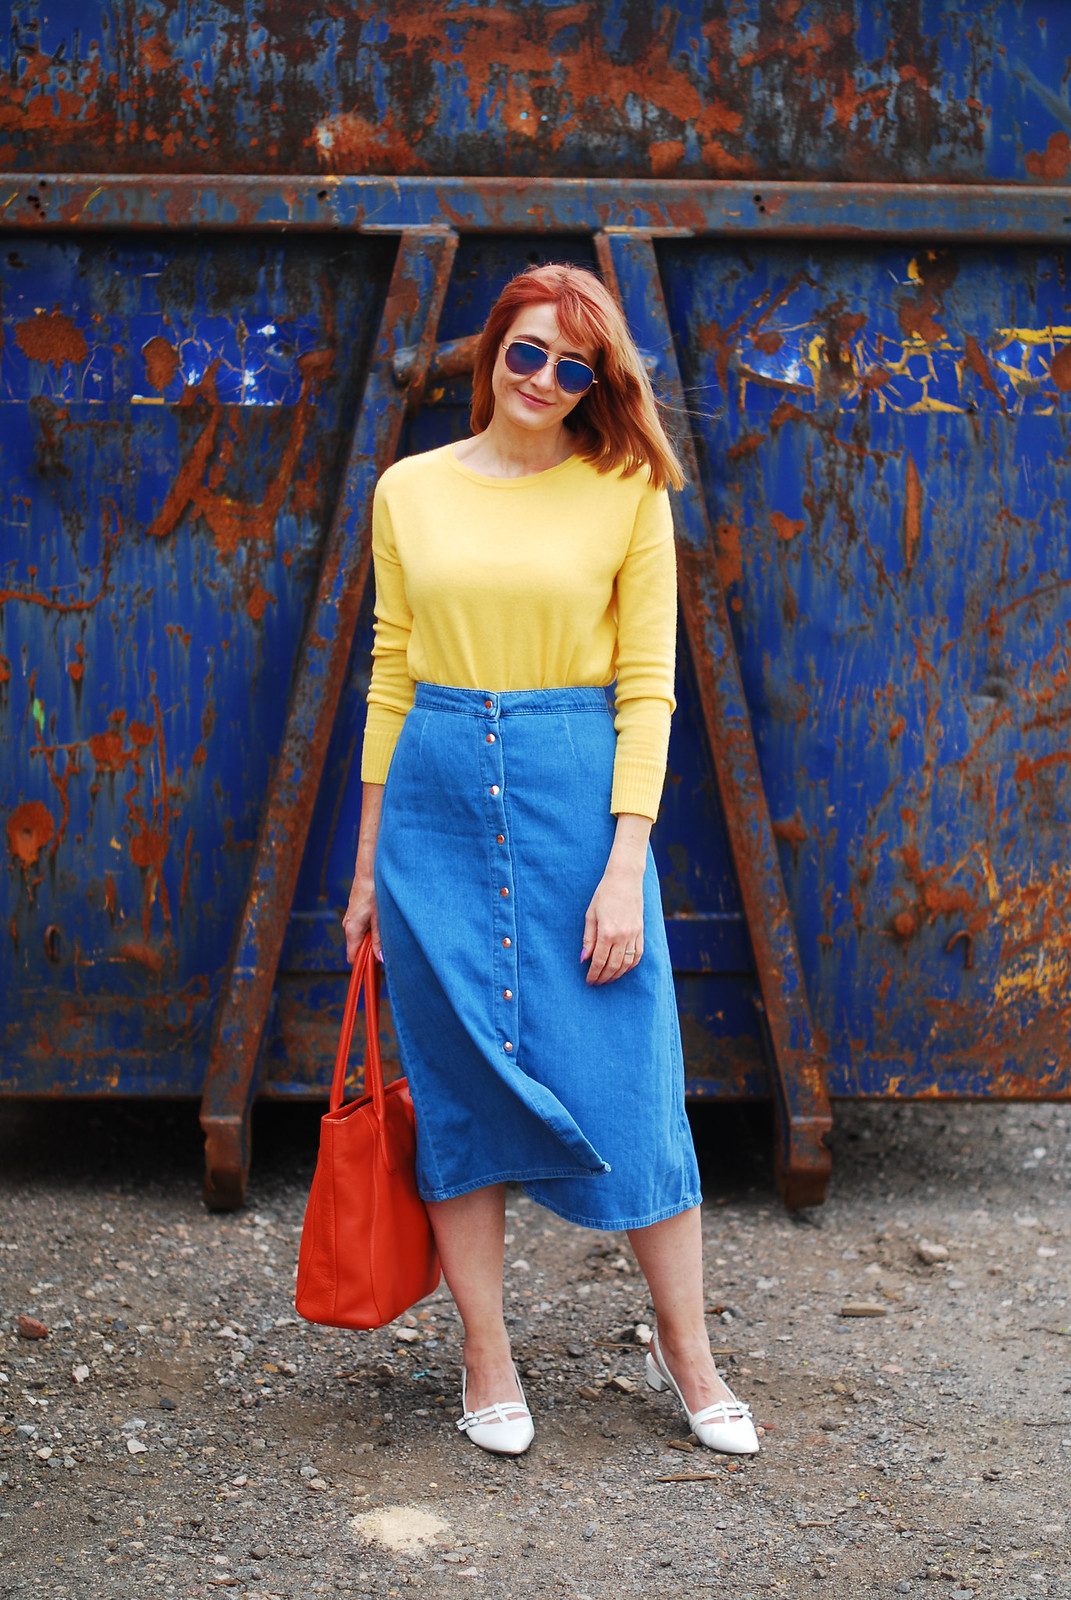 Primary brights colour blocking: Yellow sweater, denim midi skirt, orange tote bag, white pointed flats | Not Dressed As Lamb